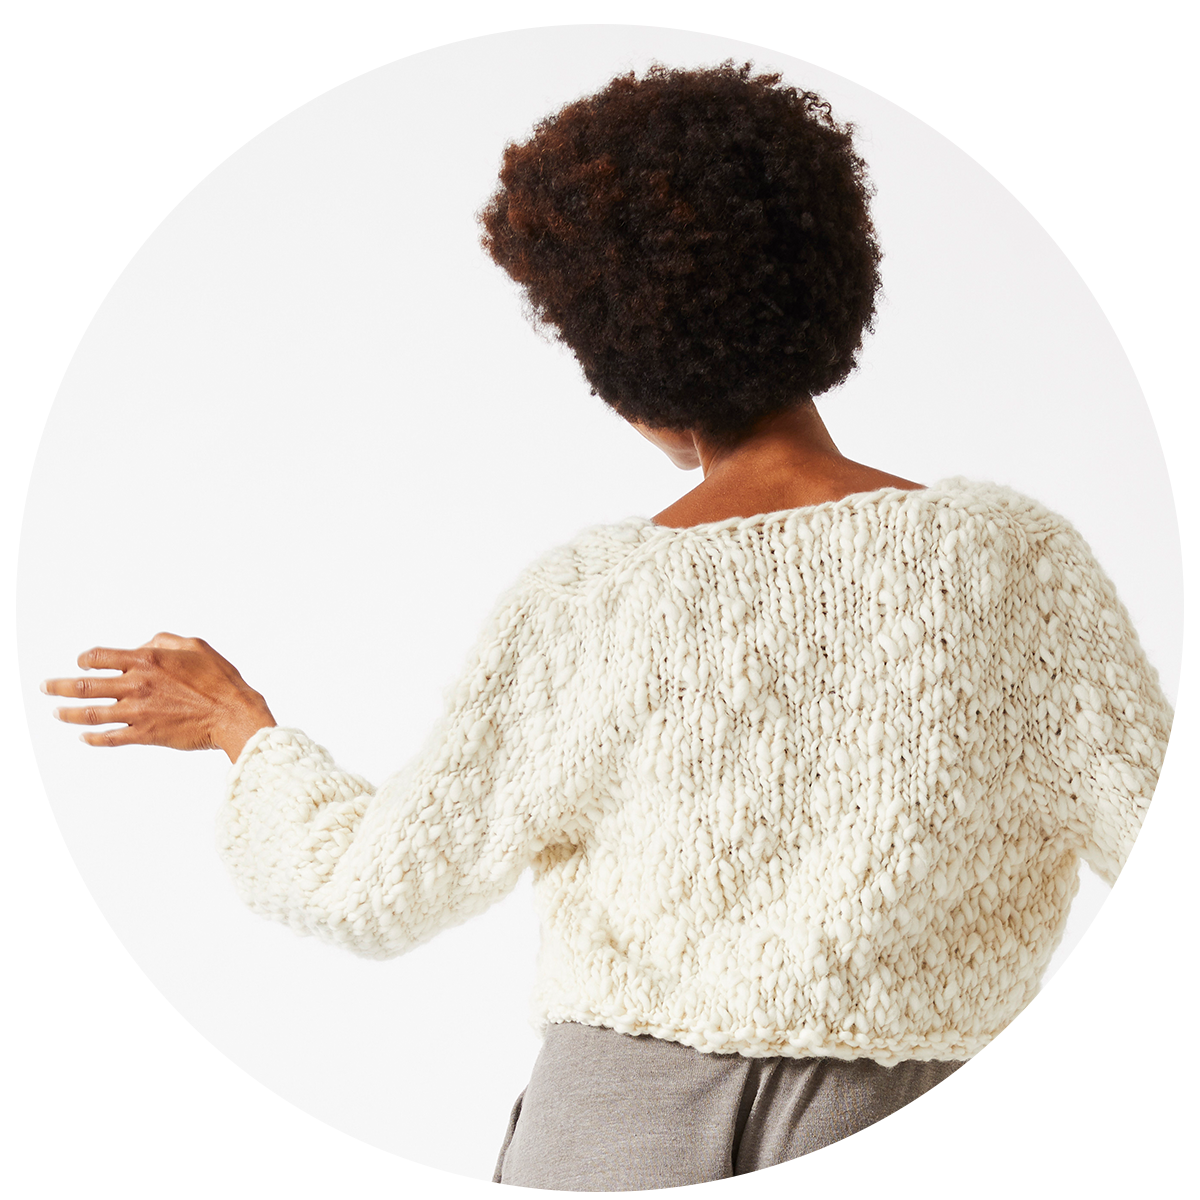 My favorite knitting notions Coco Knits #cocoknits #rowcounter